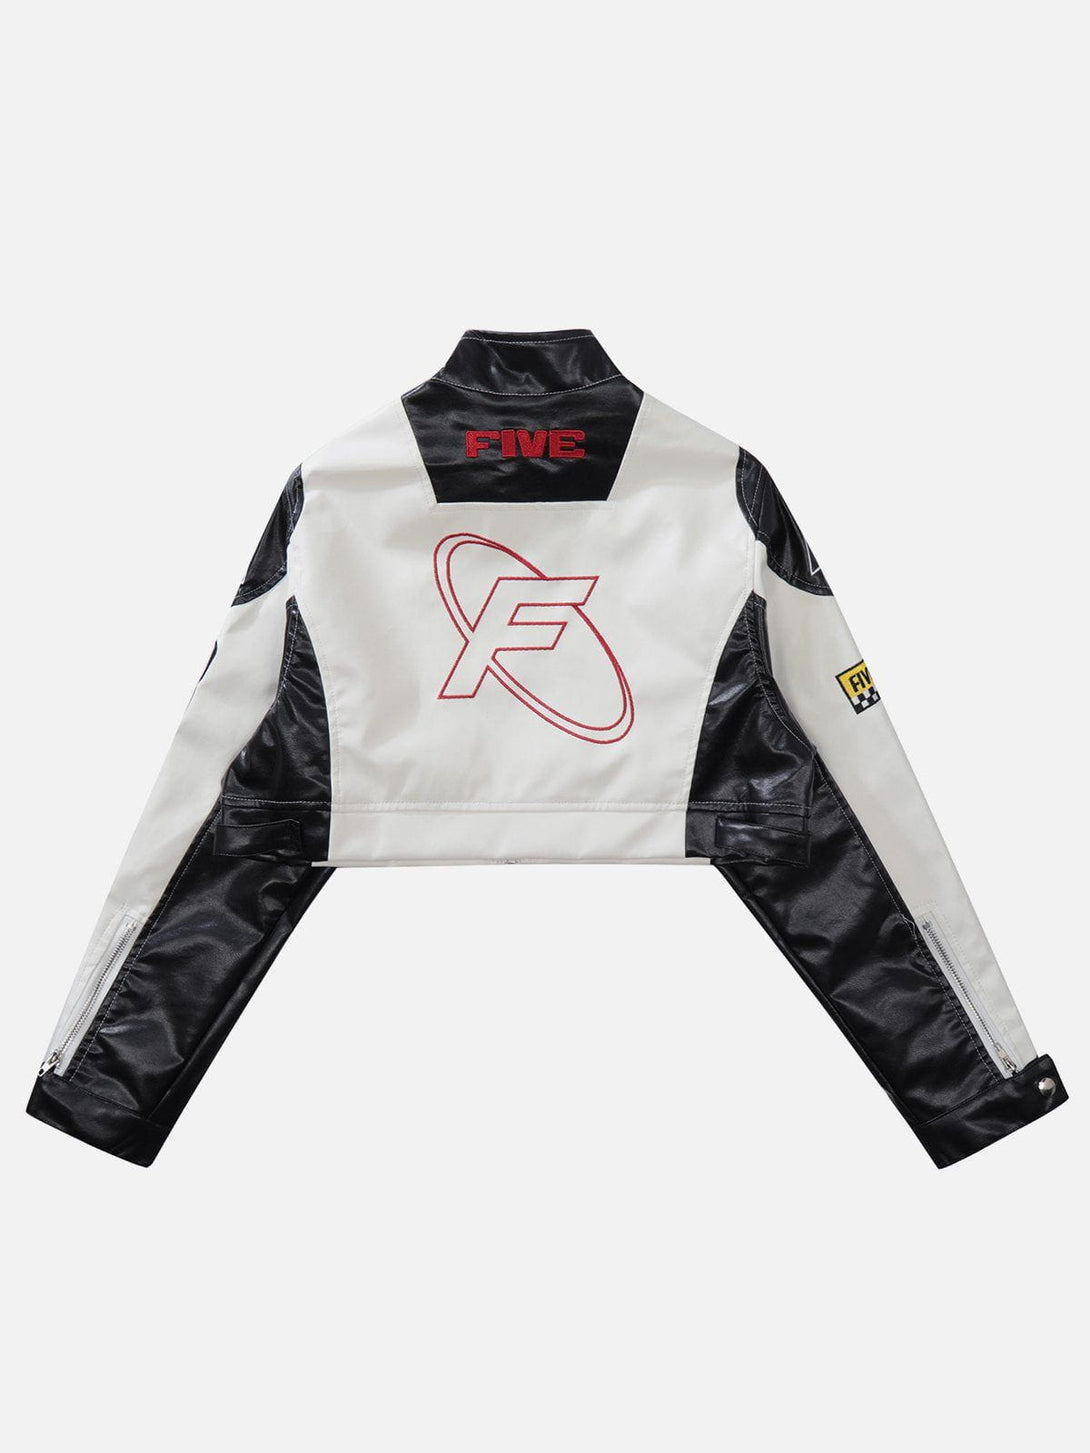 Levefly - Ambition Motorcycle Crop Jacket - Streetwear Fashion - levefly.com